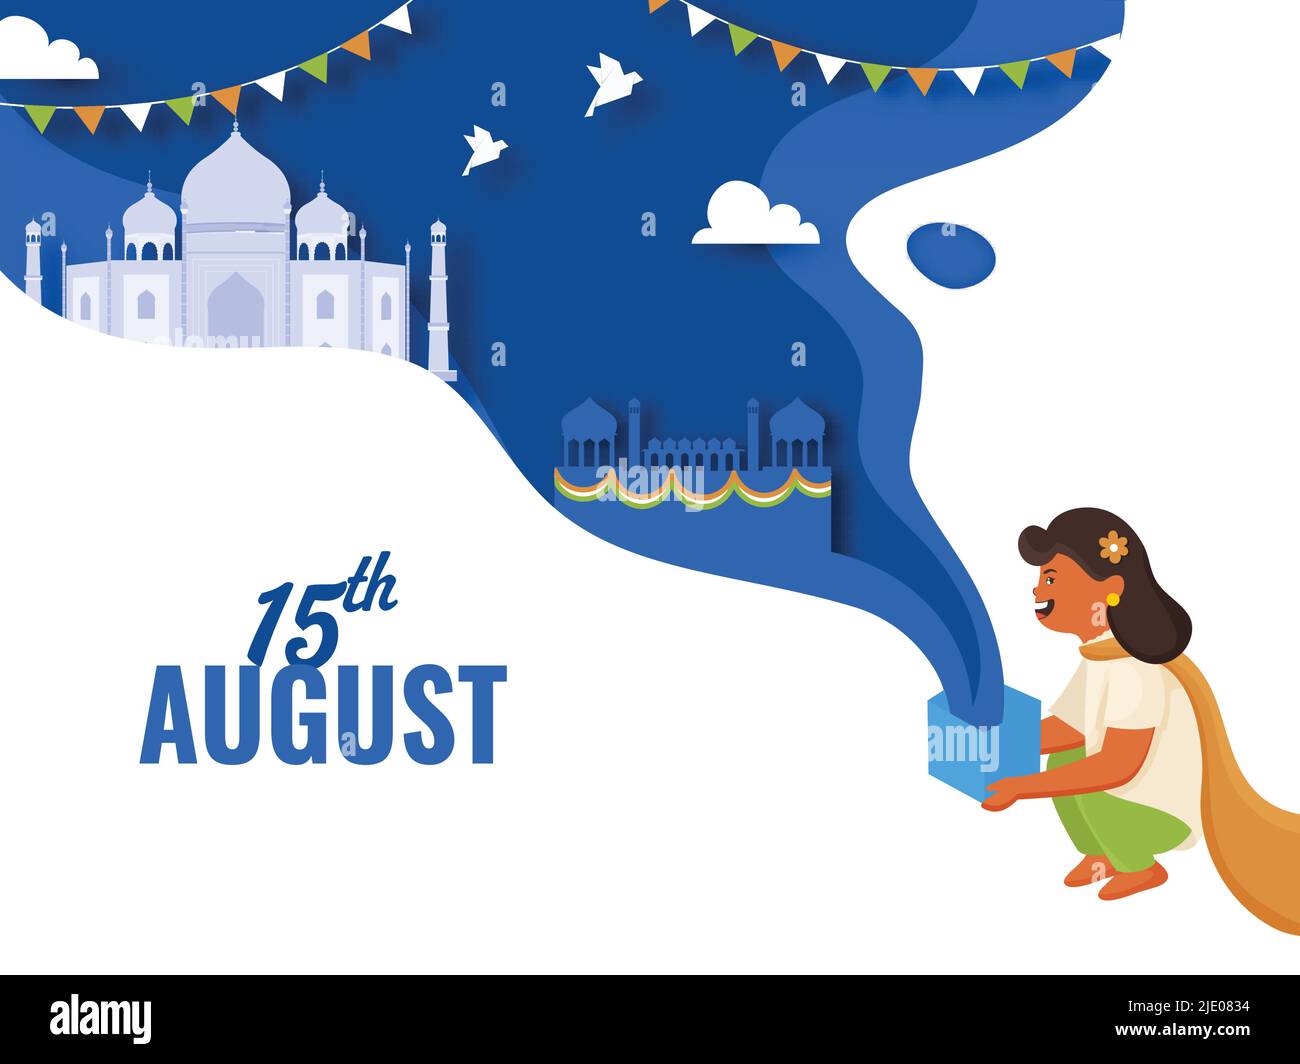 15th August Celebration Concept With Indian Girl Holding Box, Pigeon Flying, India Famous Monument On Blue And White Paper Cut Background. Stock Vector